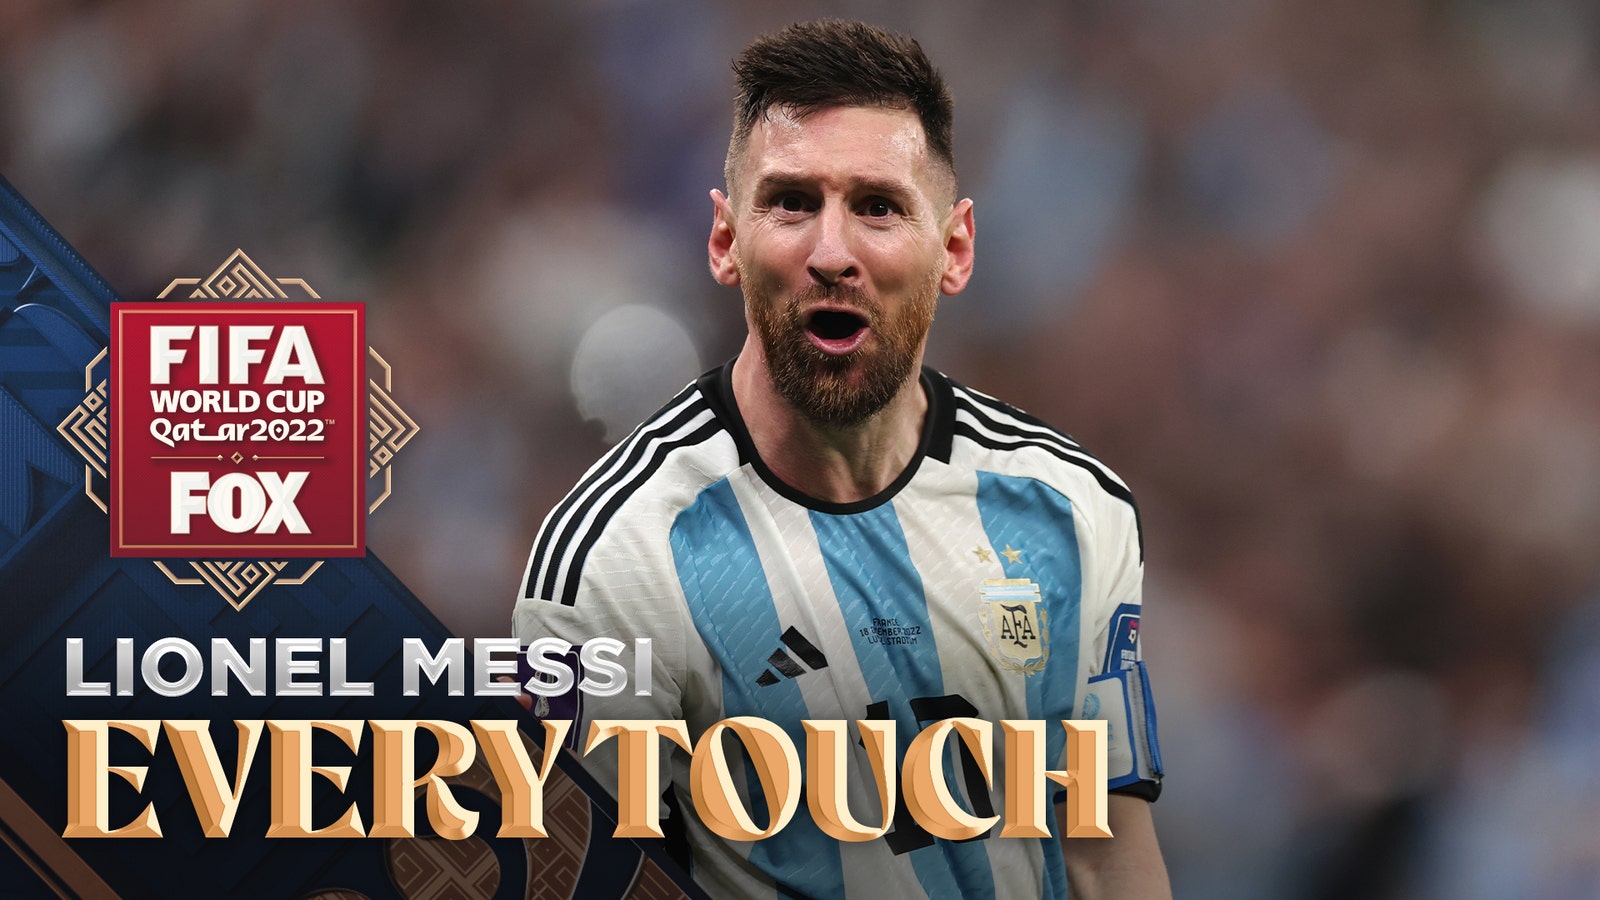 Lionel Messi: Every touch in final